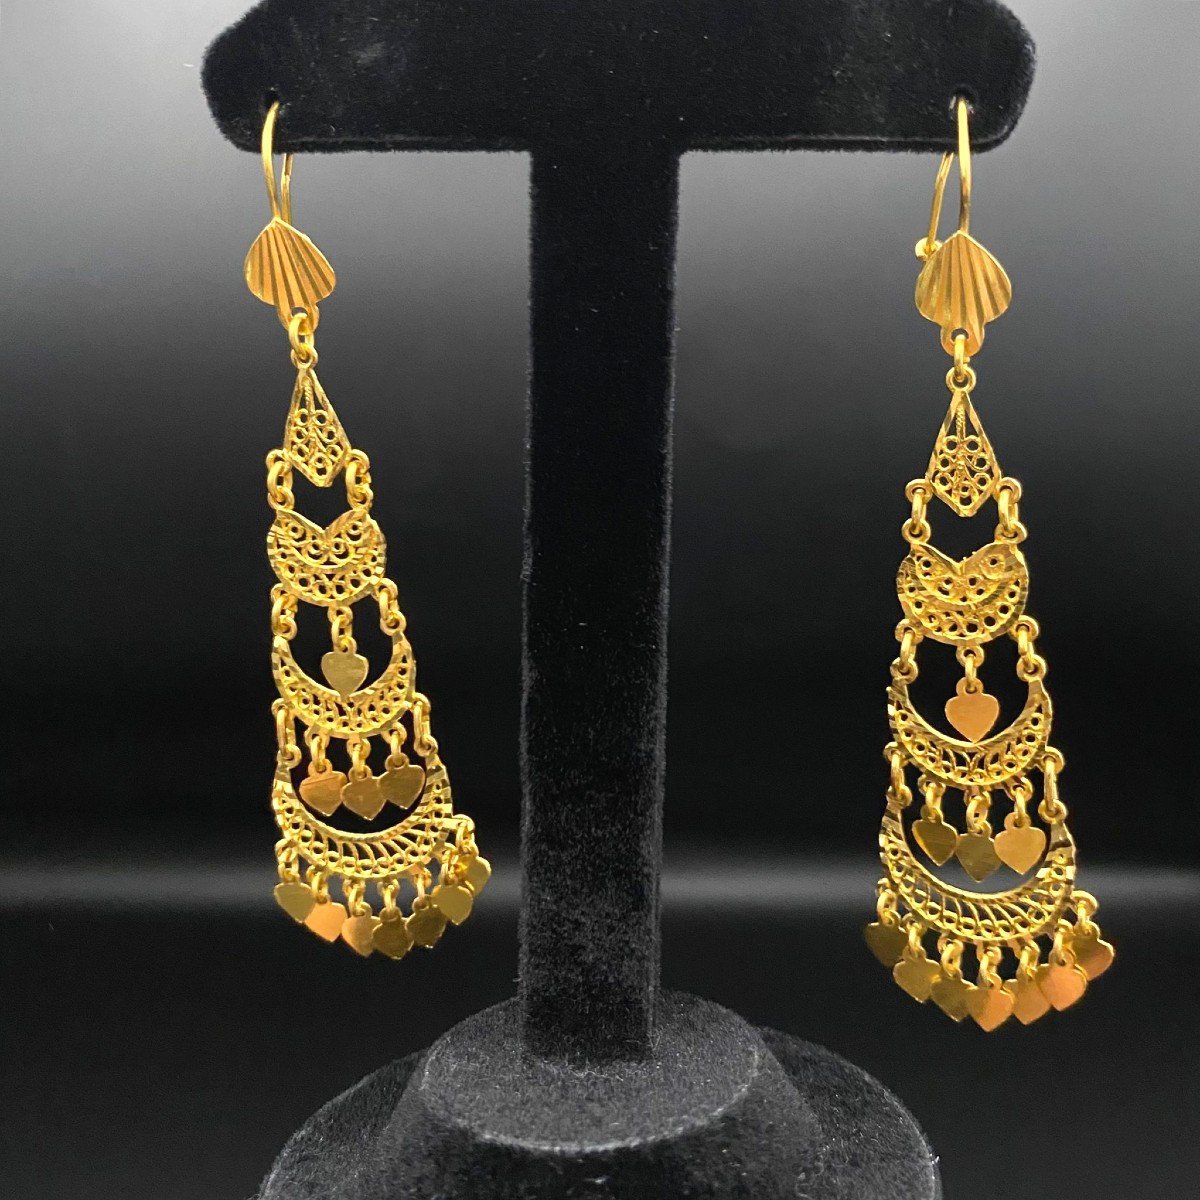 Drill Earrings - 22 Carat Gold-photo-3